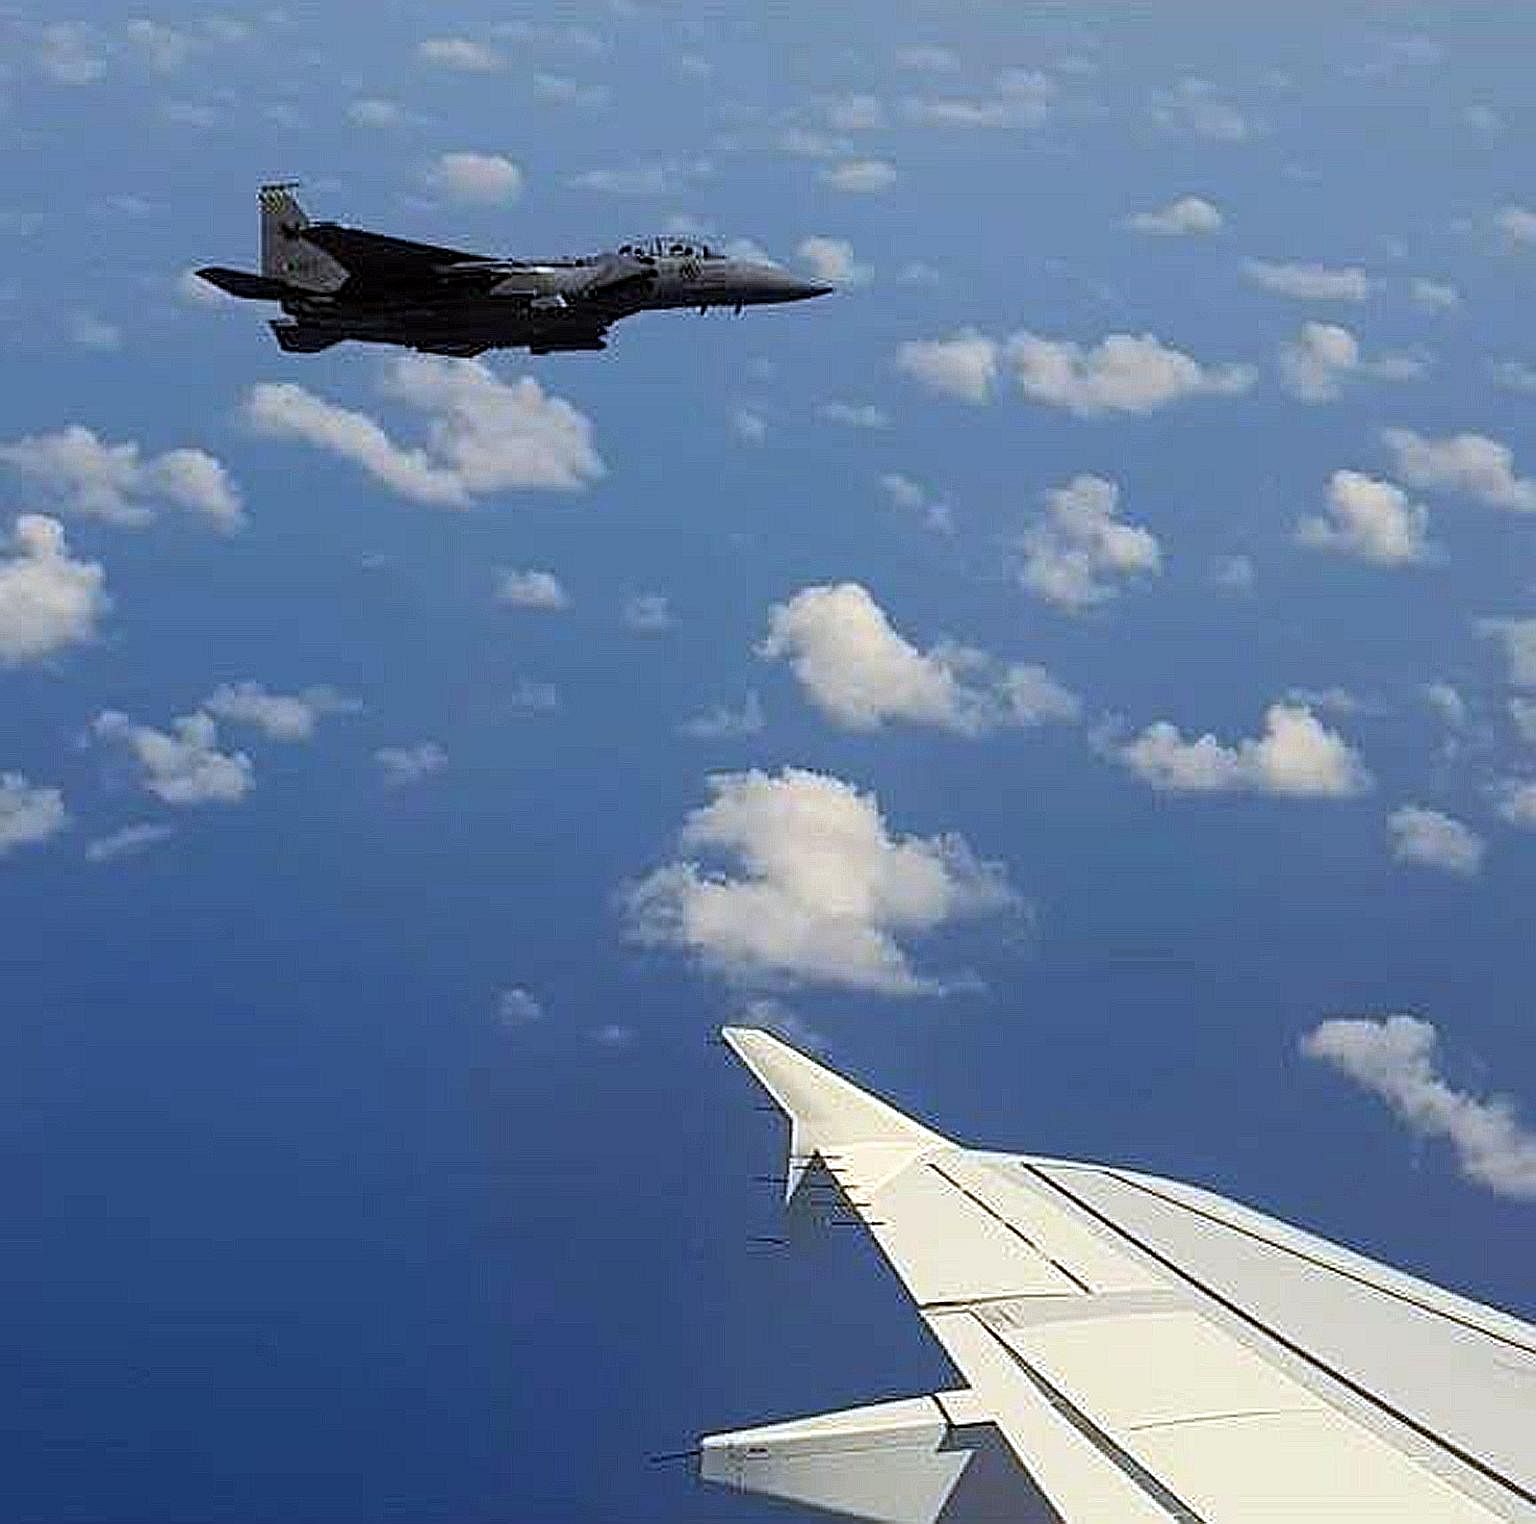 Above: One of the RSAF fighter jets that escorted Scoot Flight TR634 as it entered Singapore airspace on April 5, after passenger Hsu Chun Meng said he had a bomb in his bag. Left: The plane landed at a remote area away from the main Changi Airport t